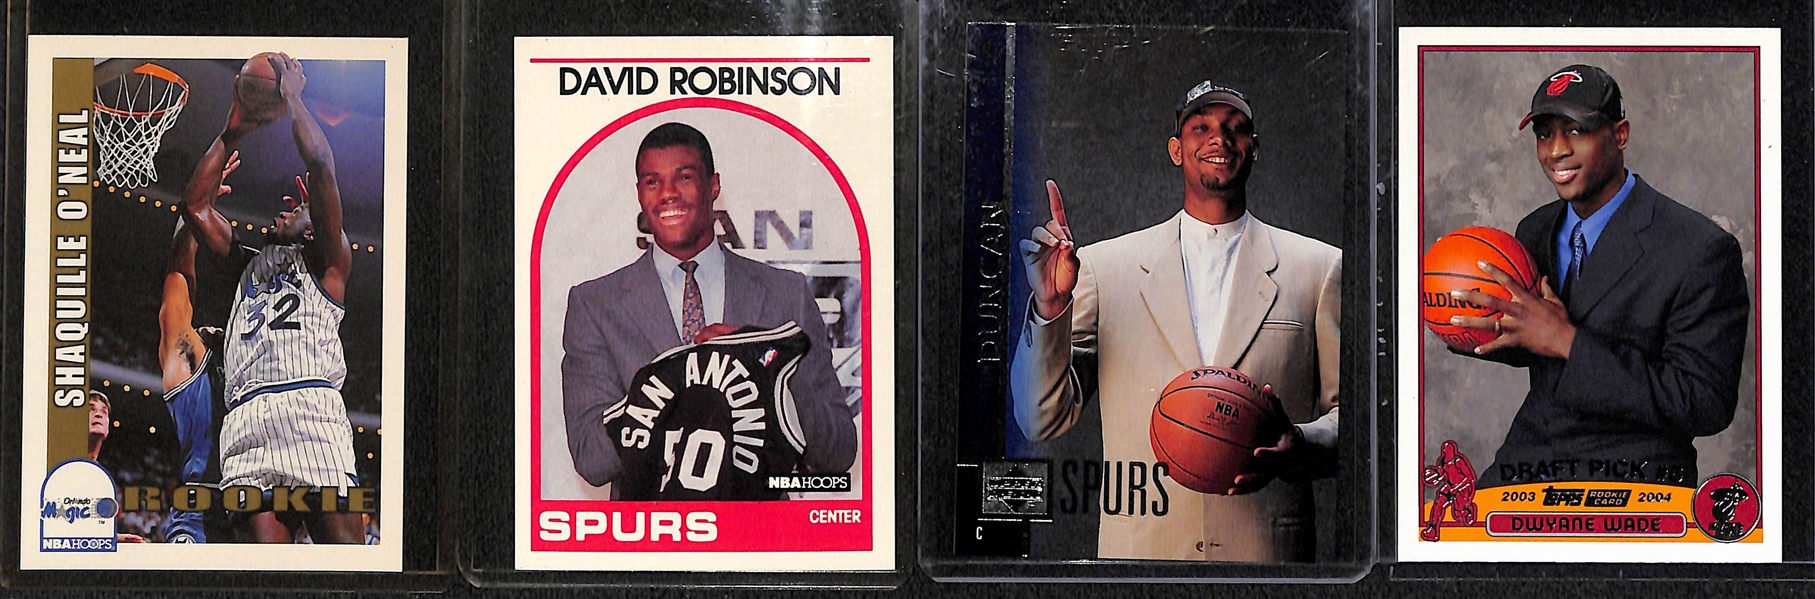 (27) Basketball Rookie Cards w. Shaq, D. Robinson, T. Duncan, D. Wade, C. Anthony, Nowitzki, Nash, Kidd, Hill, Bosh, Mourning